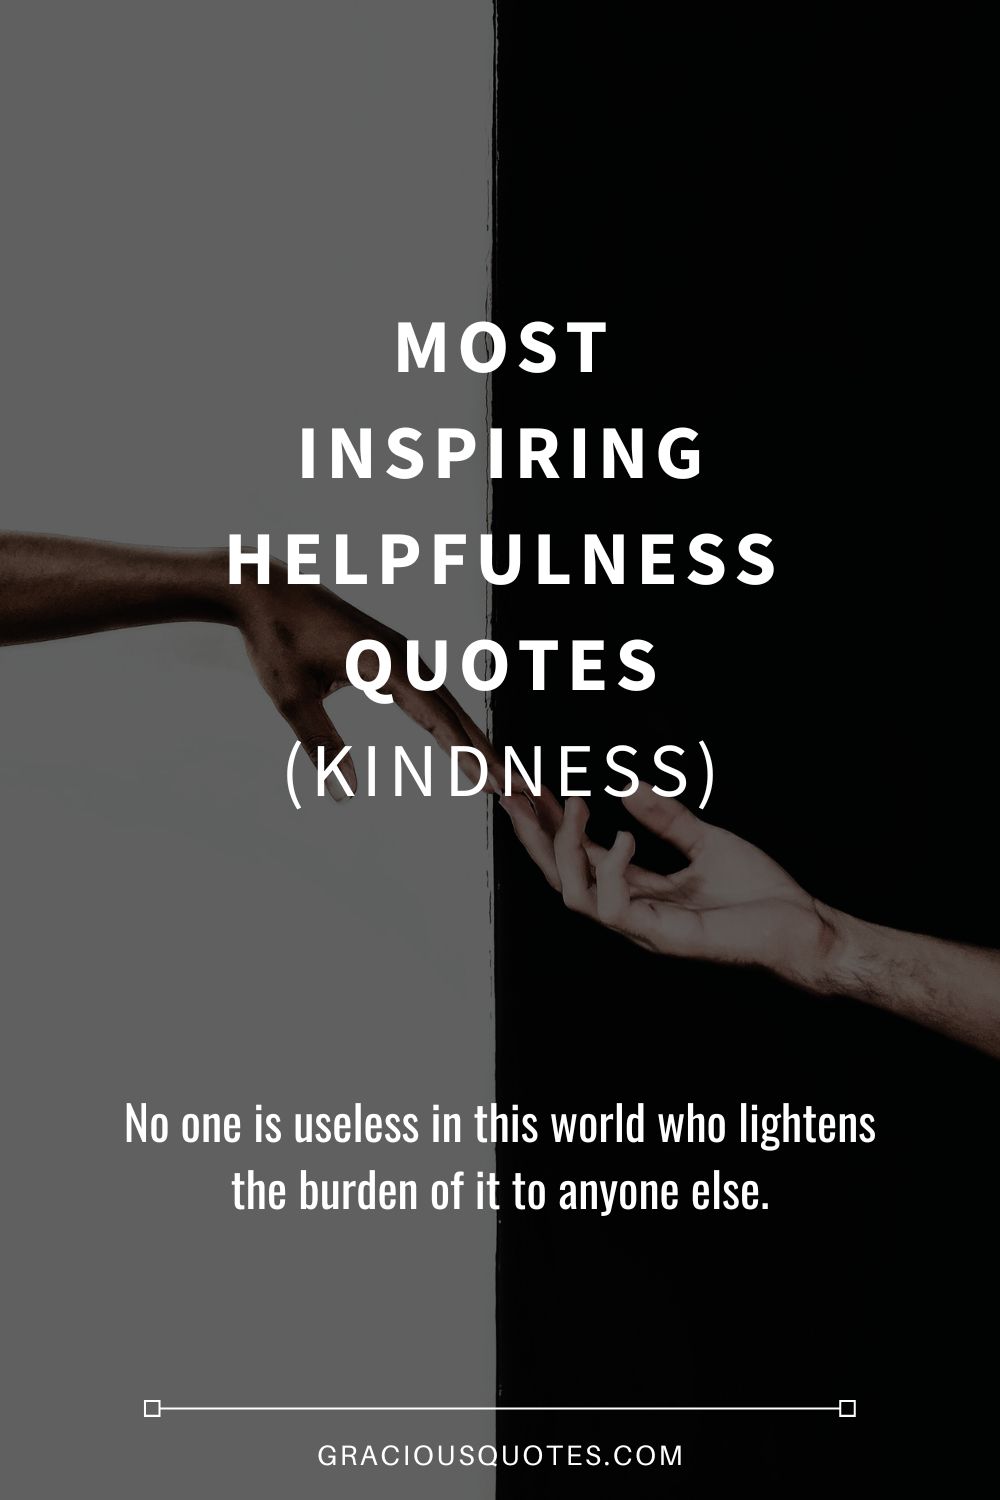 Most Inspiring Helpfulness Quotes (KINDNESS) - Gracious Quotes